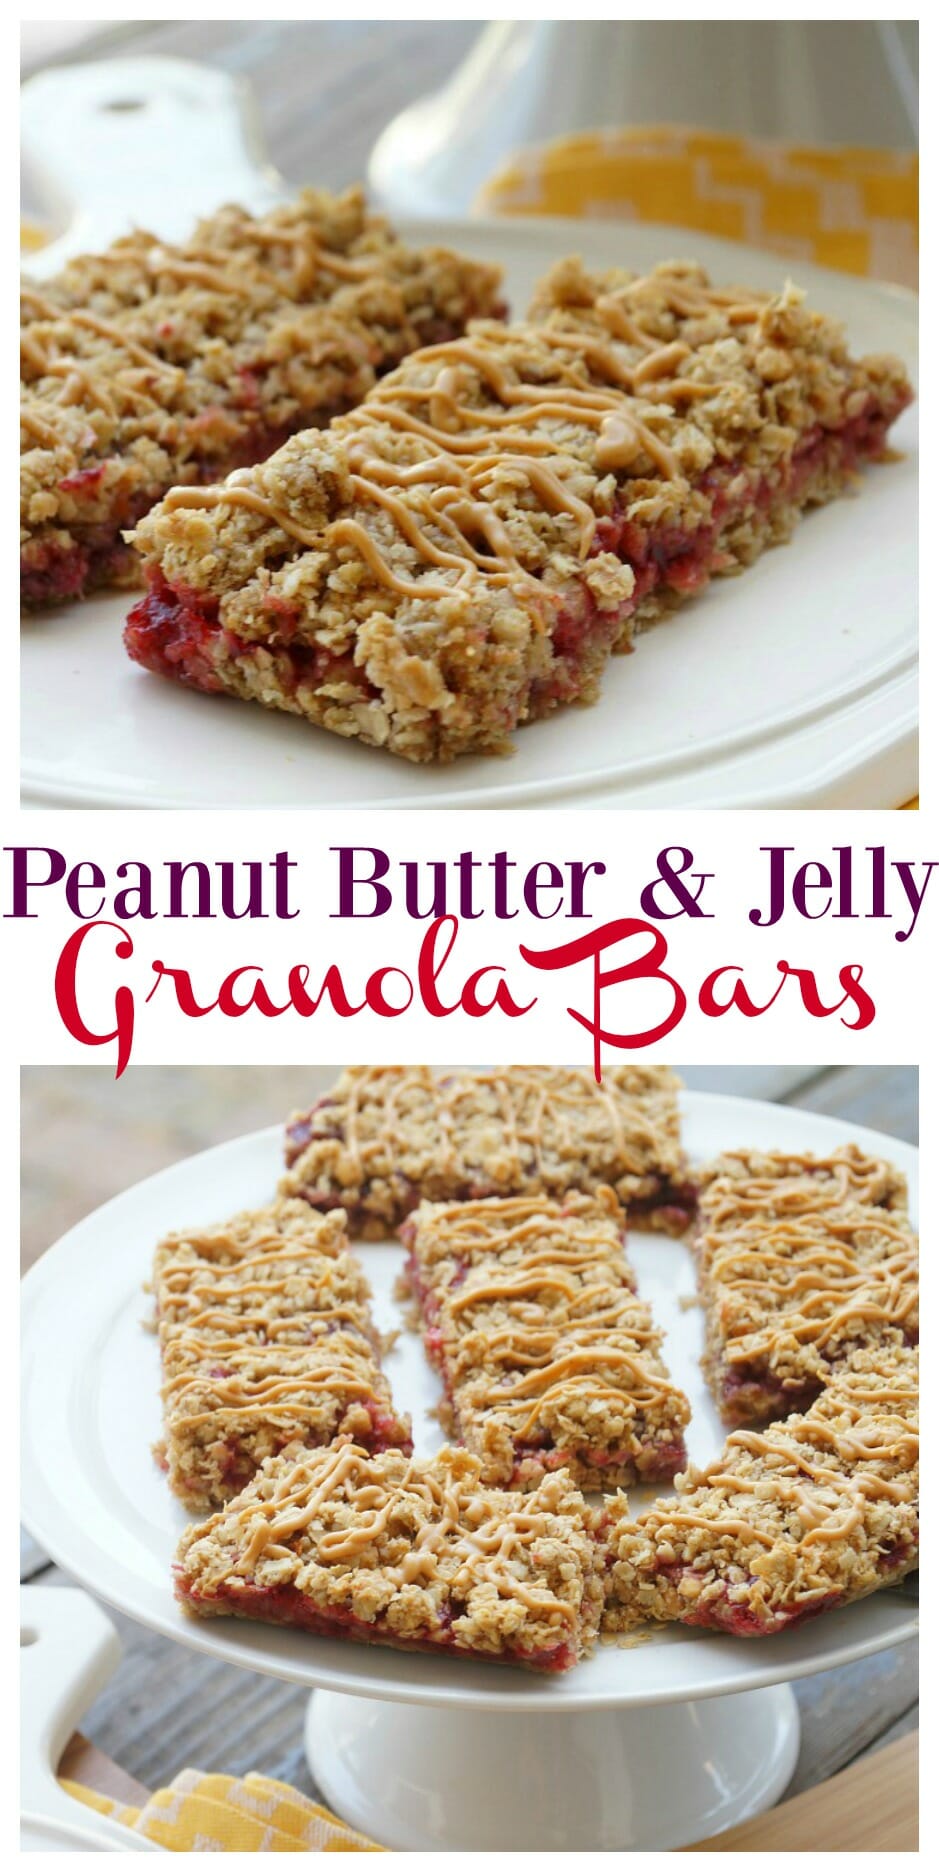 Simple Homemade Peanut Butter and Jelly Granola Bars